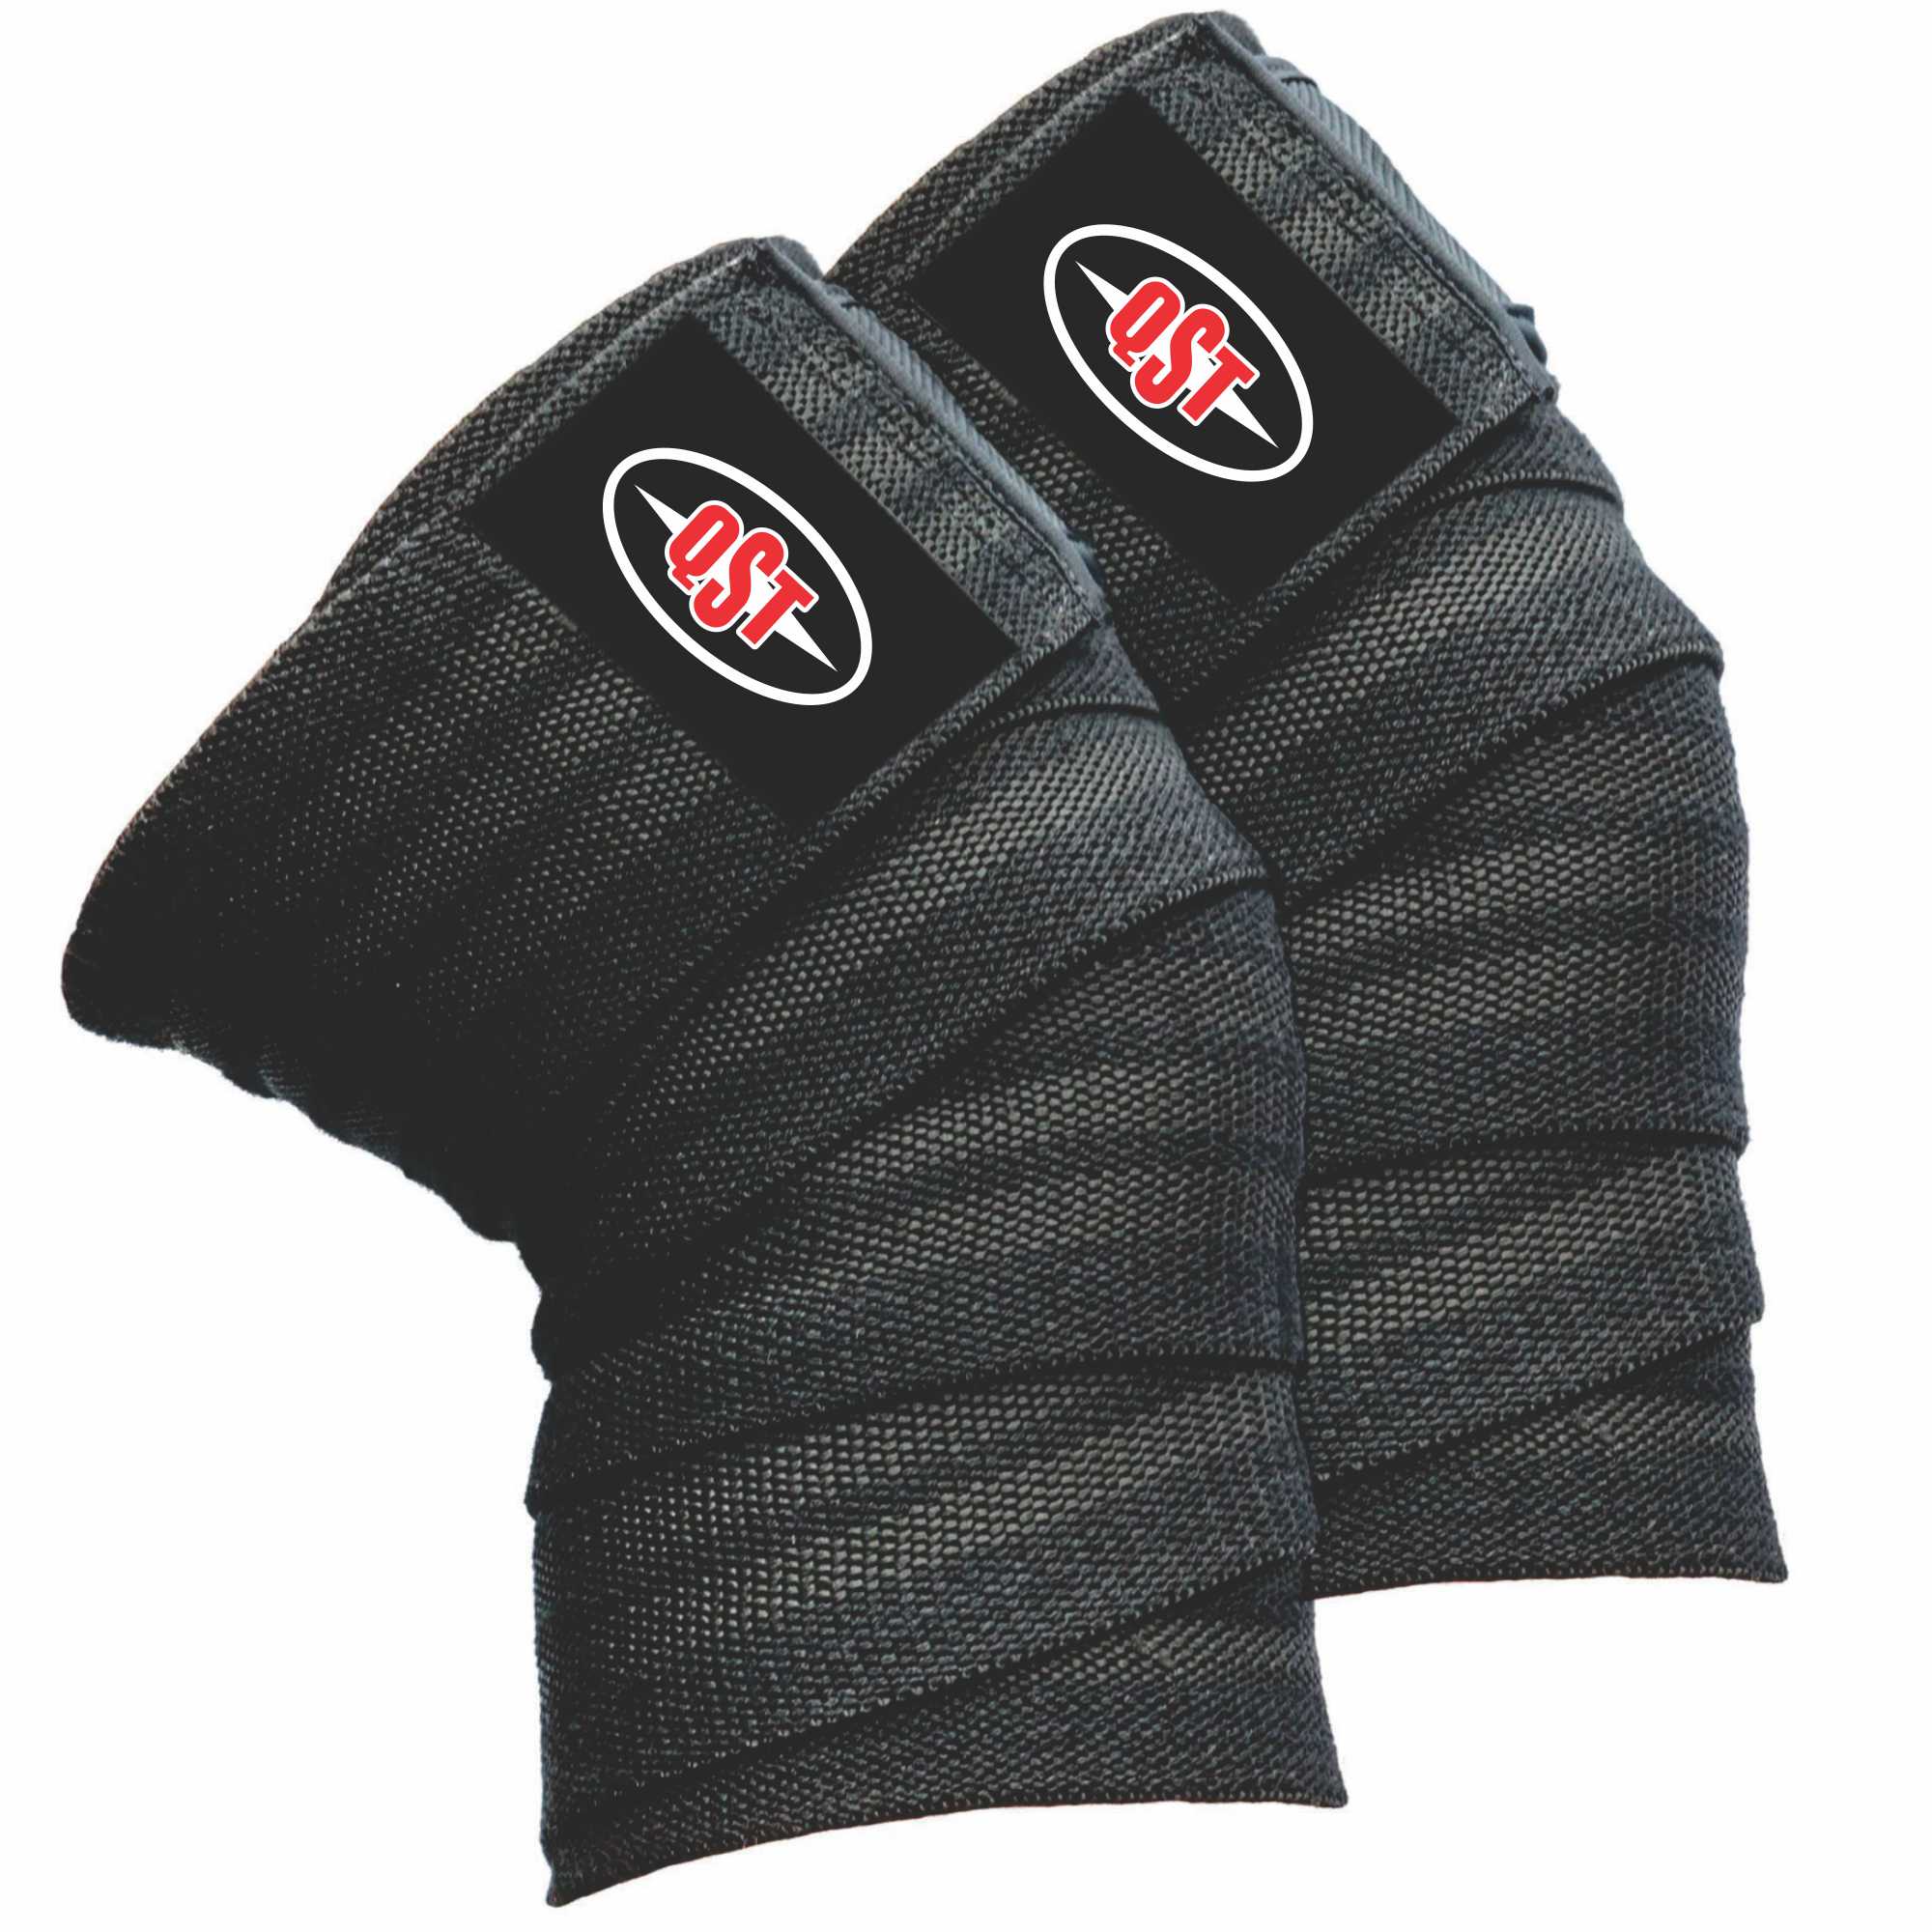 Weightlifting Knee Wraps - ACS-1518